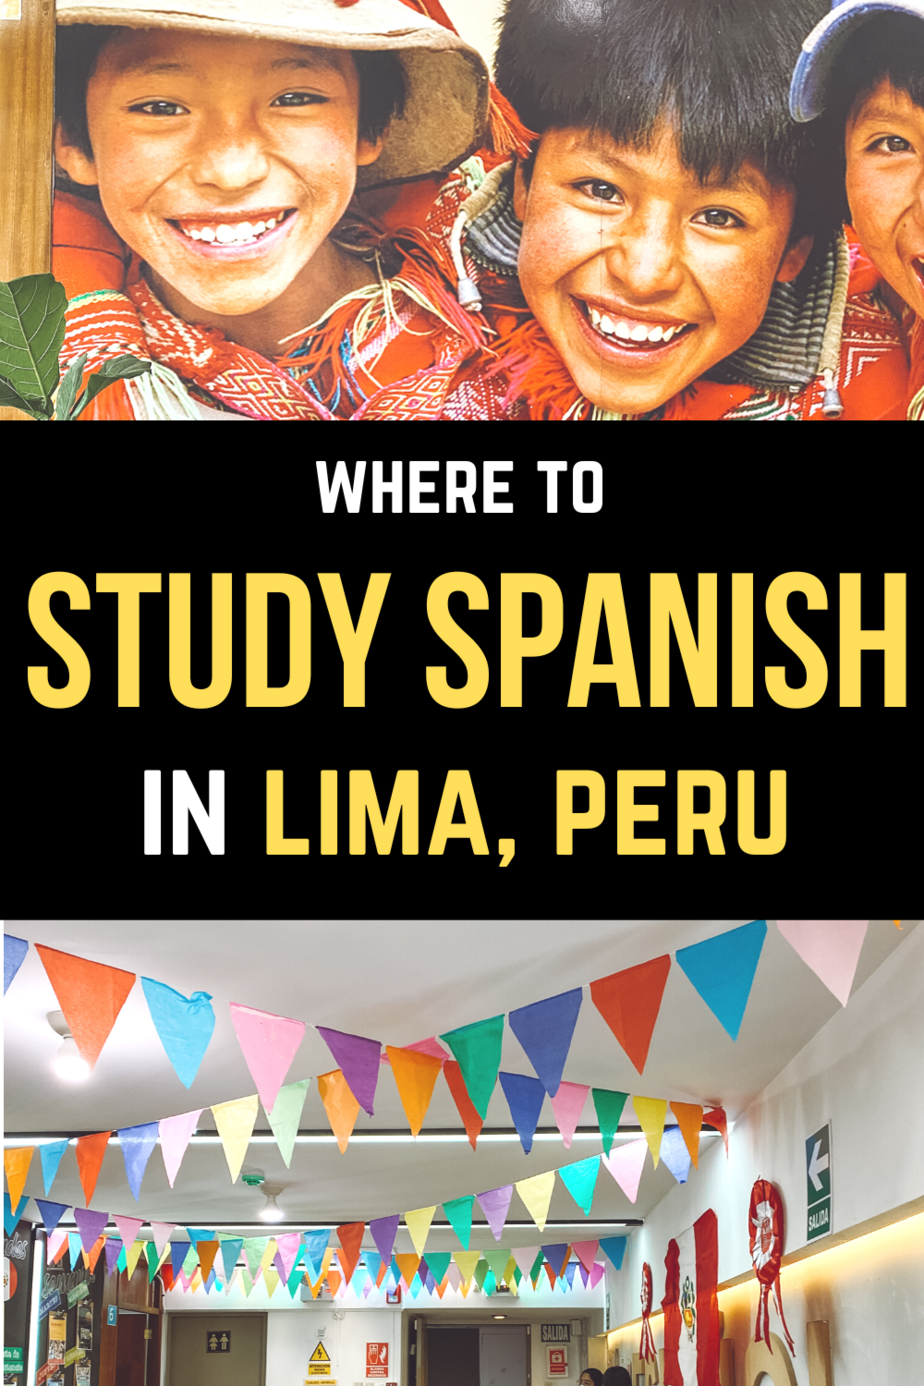 Looking for the best Spanish school in Lima Peru? Read our totally honest review of Peruwayna, one of the top rated Spanish schools in Lima.